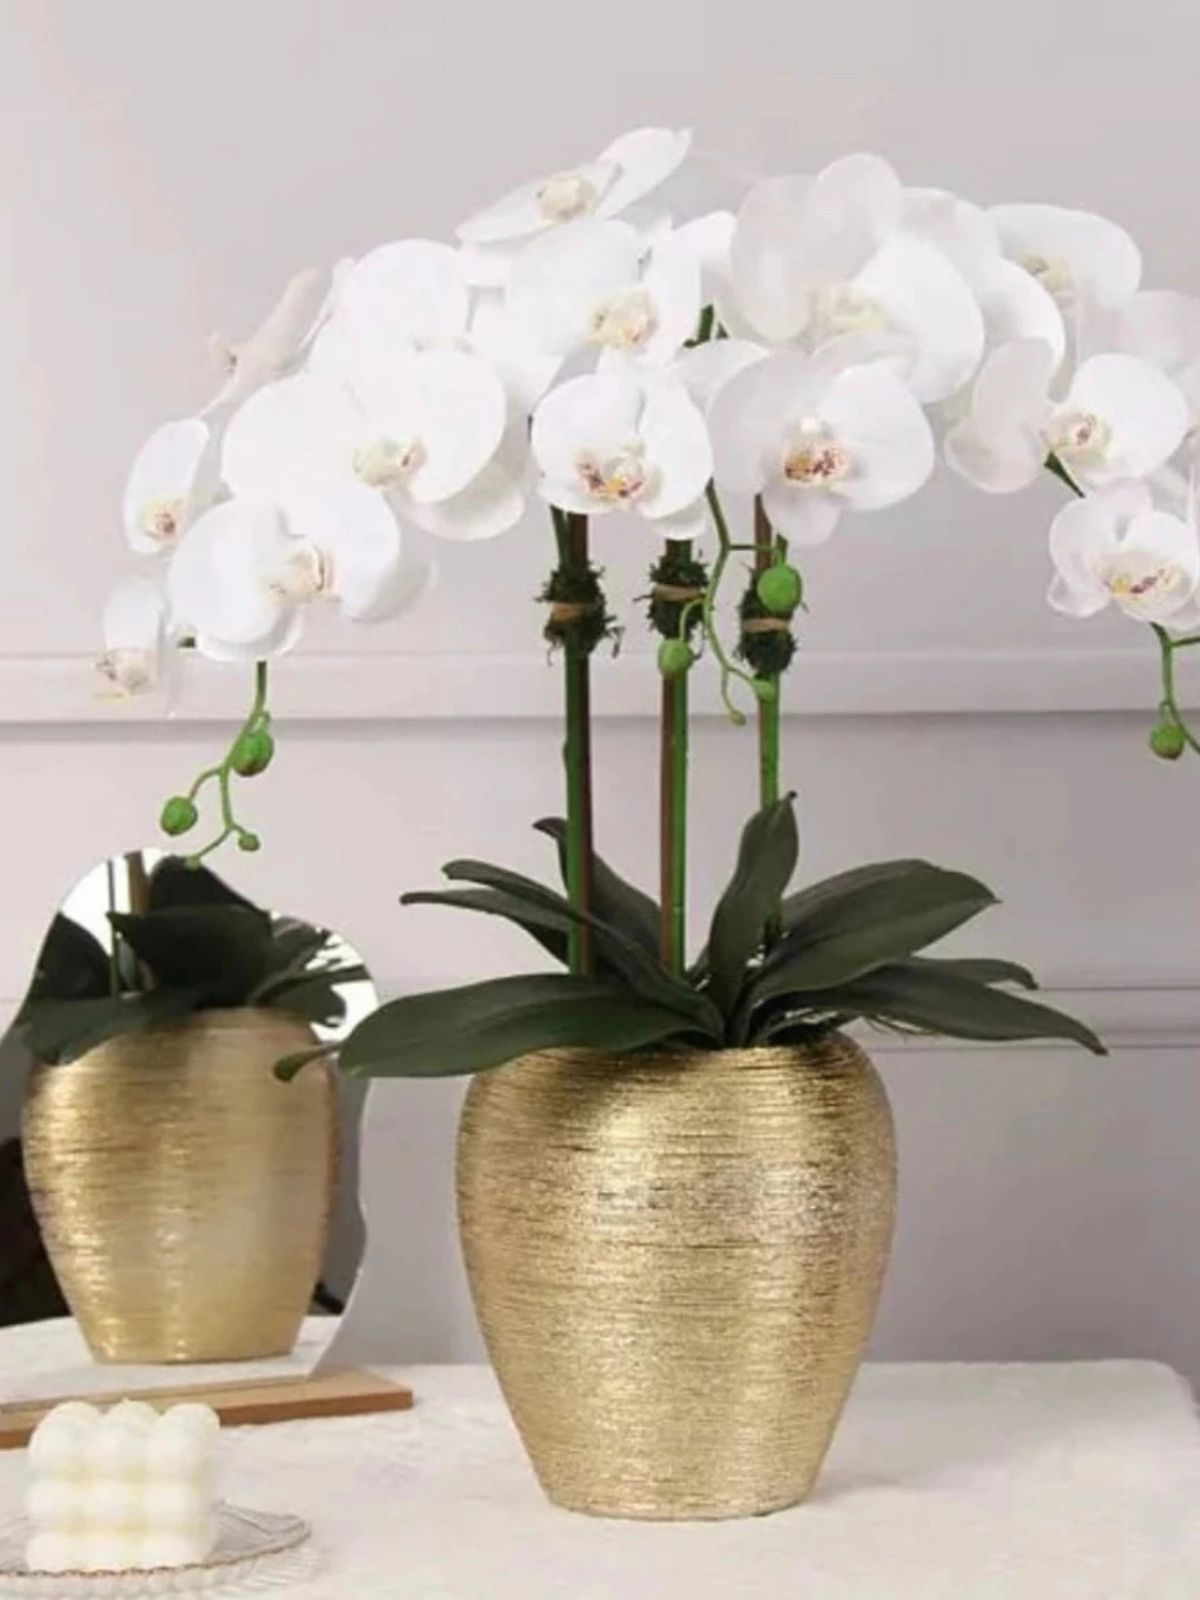 White Silk Orchid Floral Arrangement in Tall Gold Porcelain Vase Staged on Table.